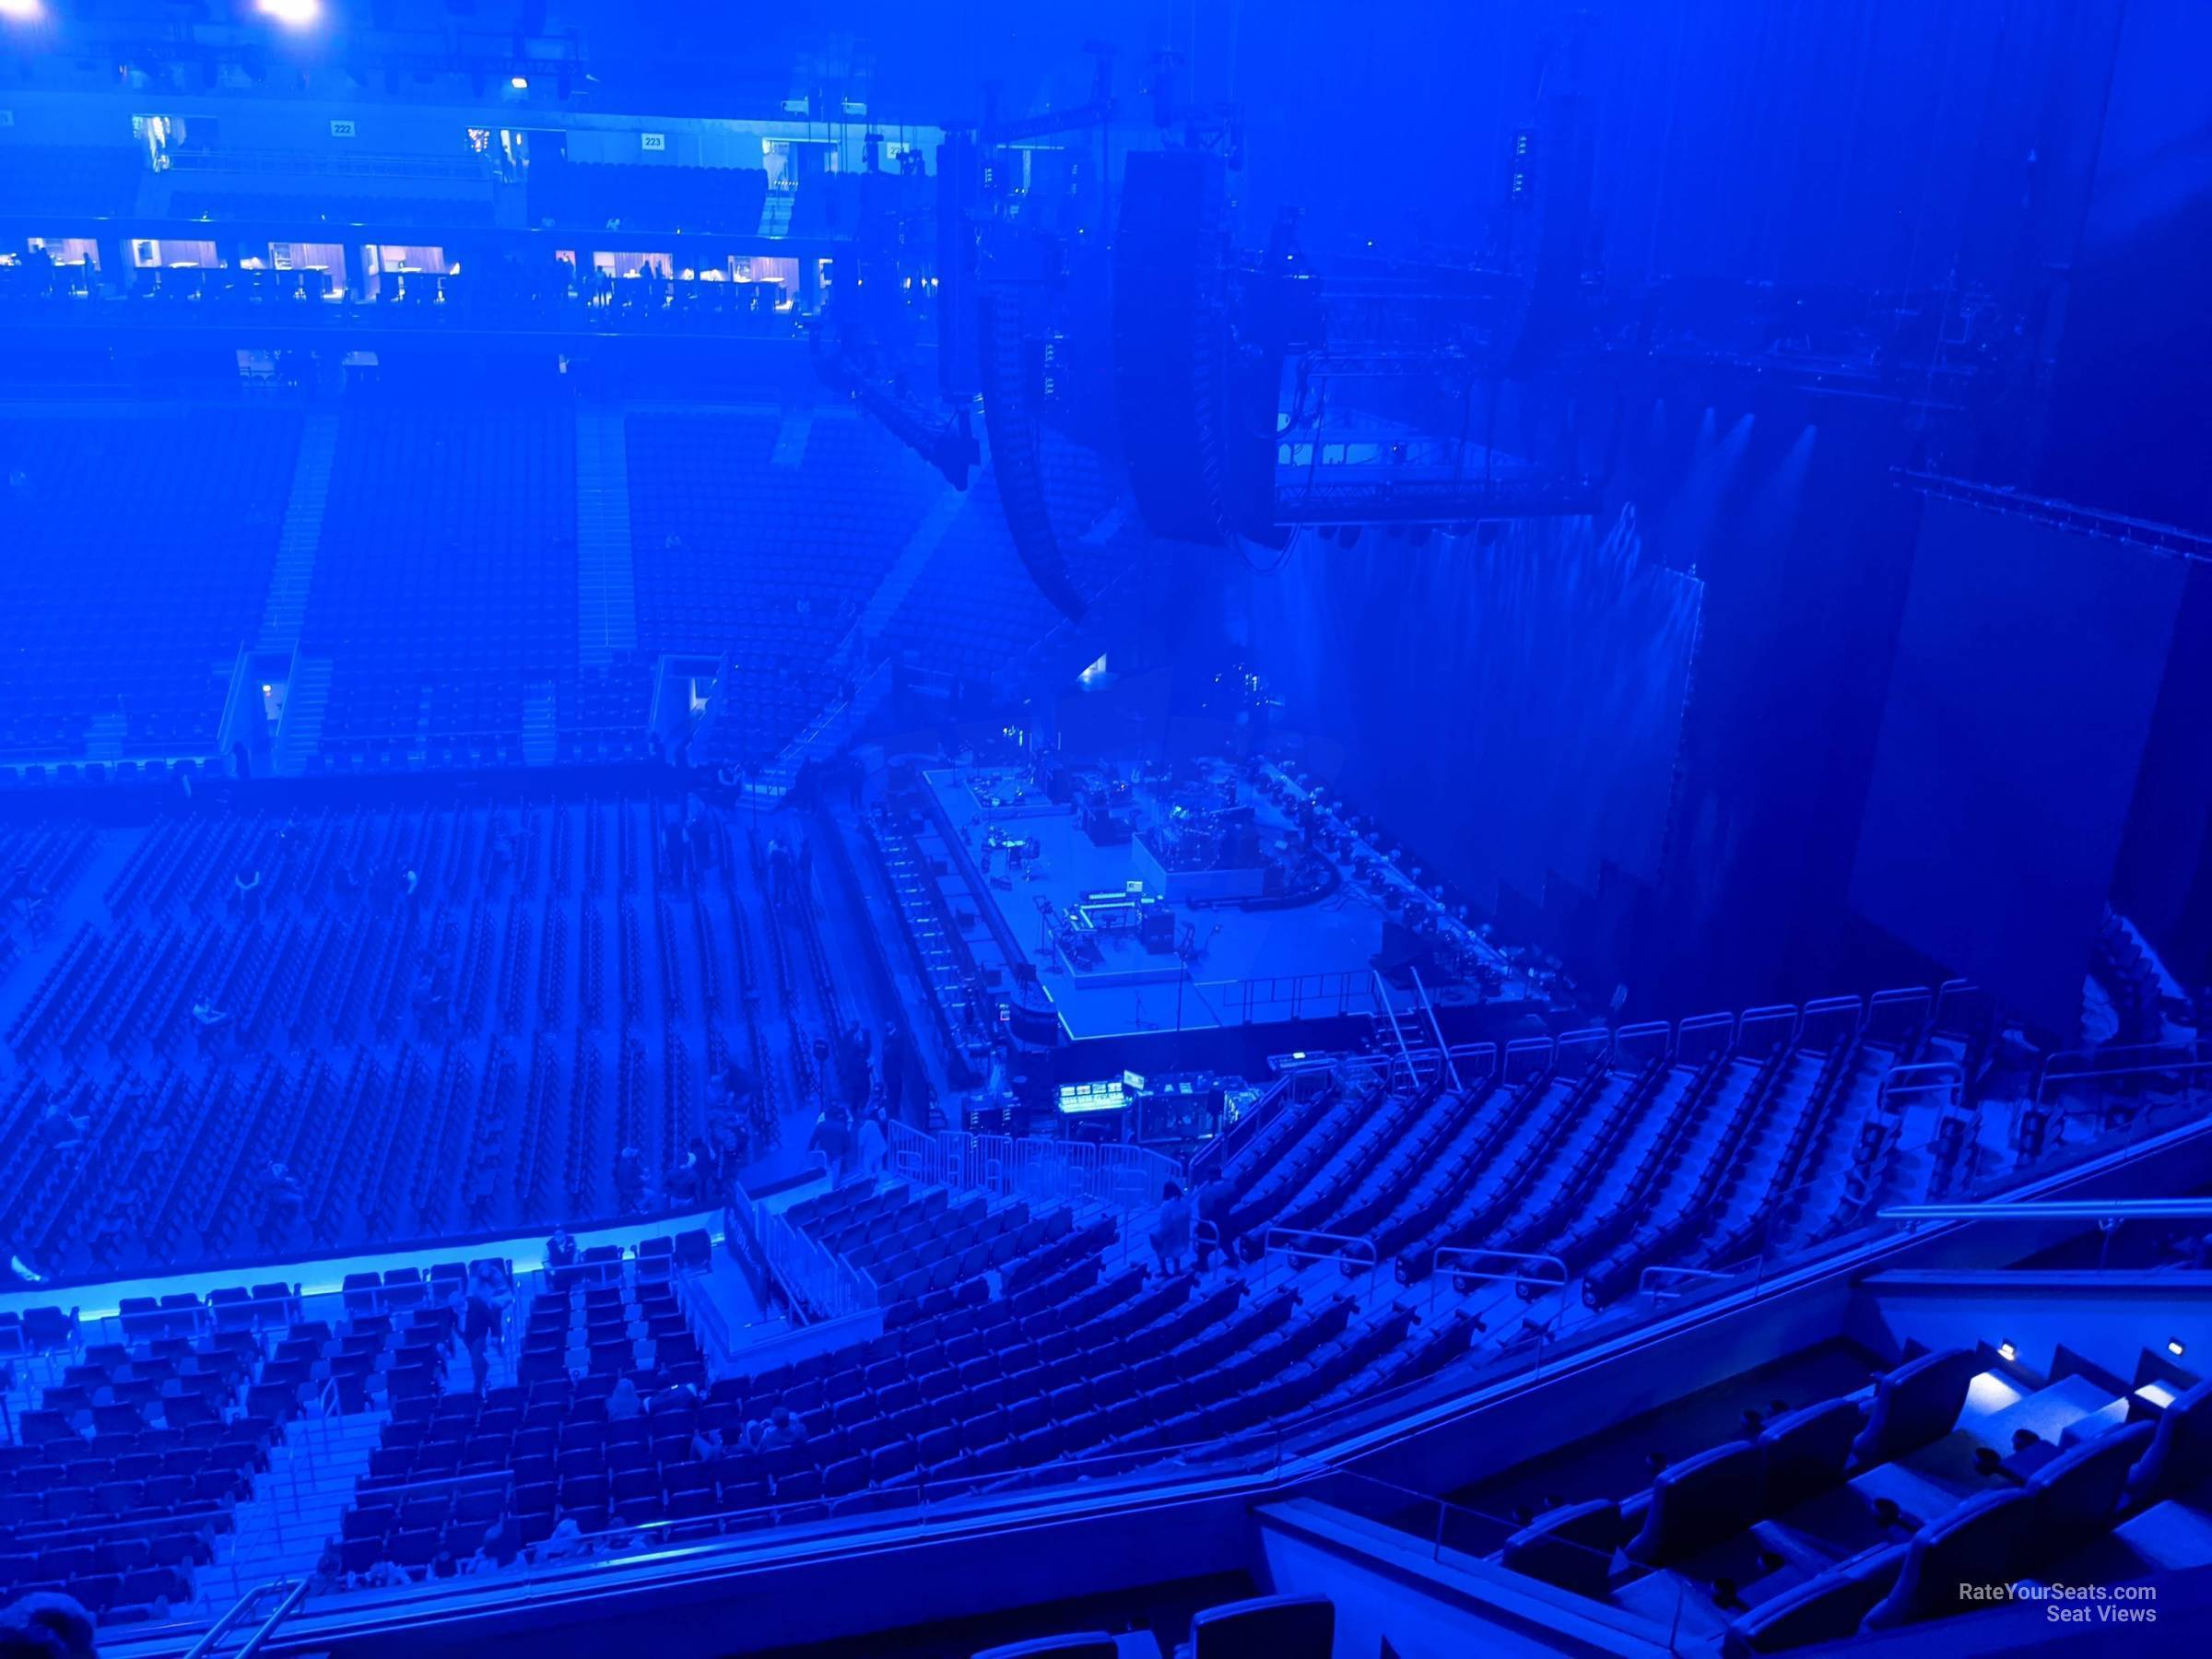 section 204, row 2 seat view  for concert - ubs arena